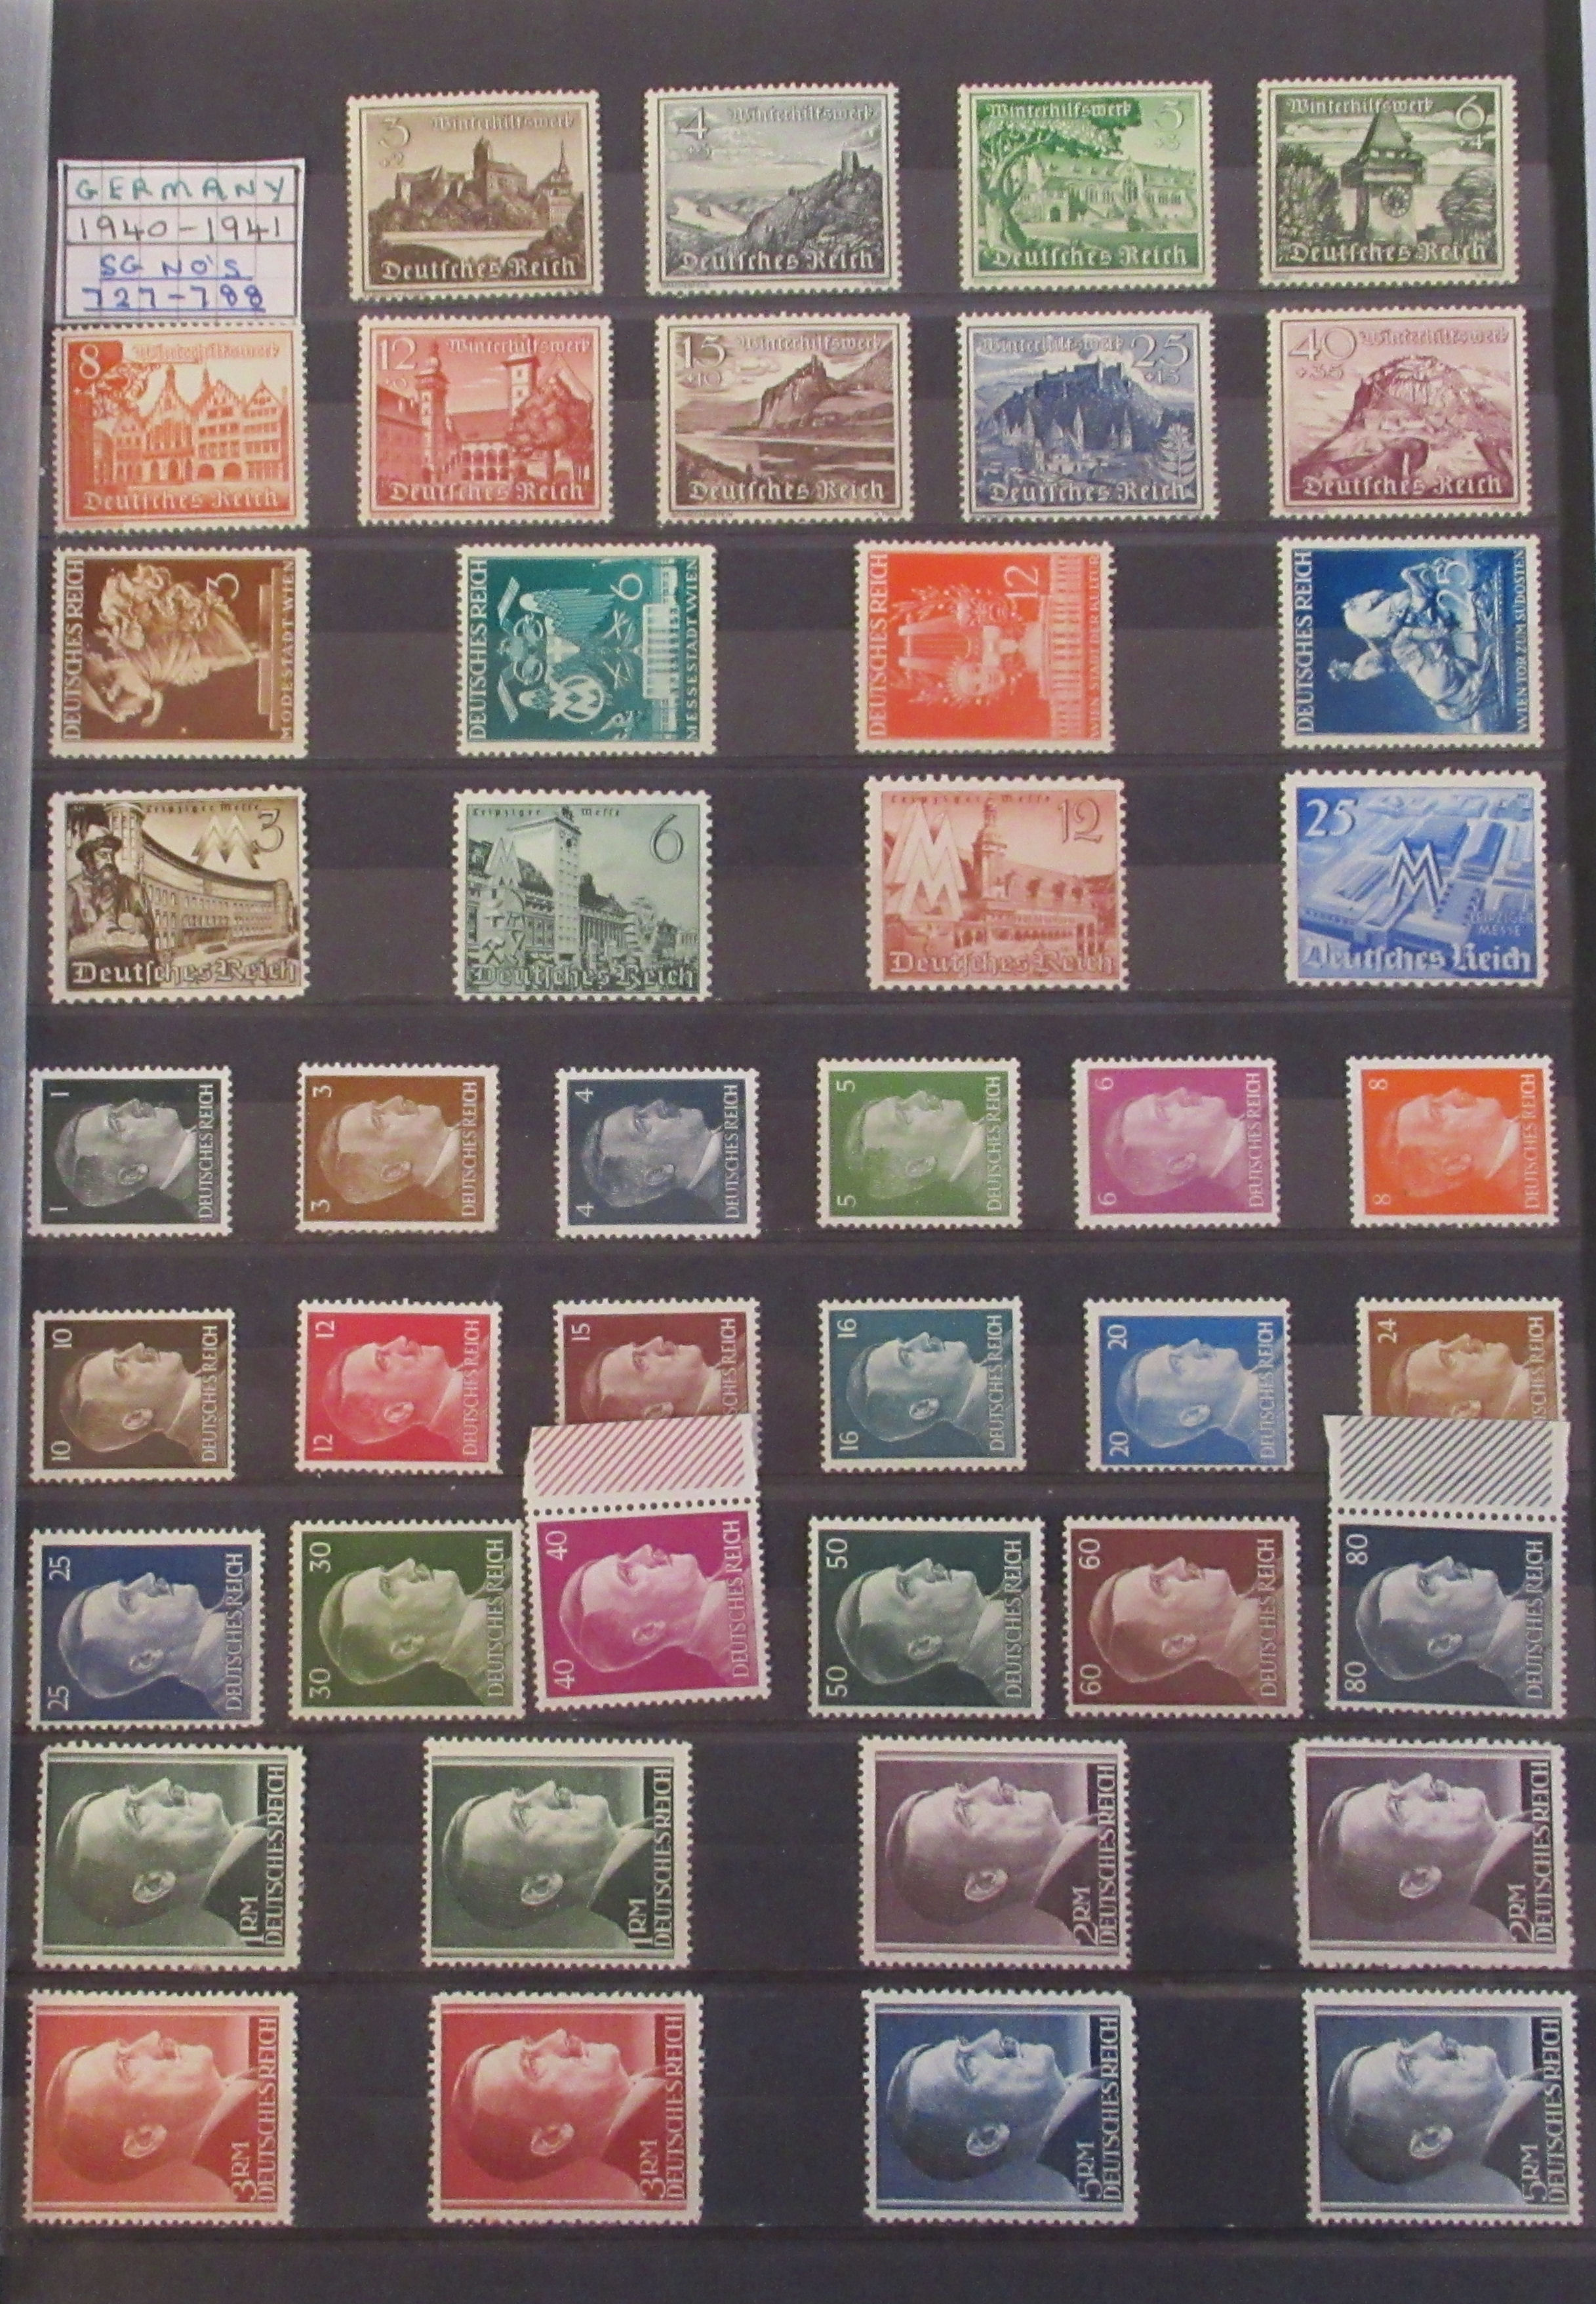 Postage stamps, Austria: 1908 to present day, - Image 6 of 6